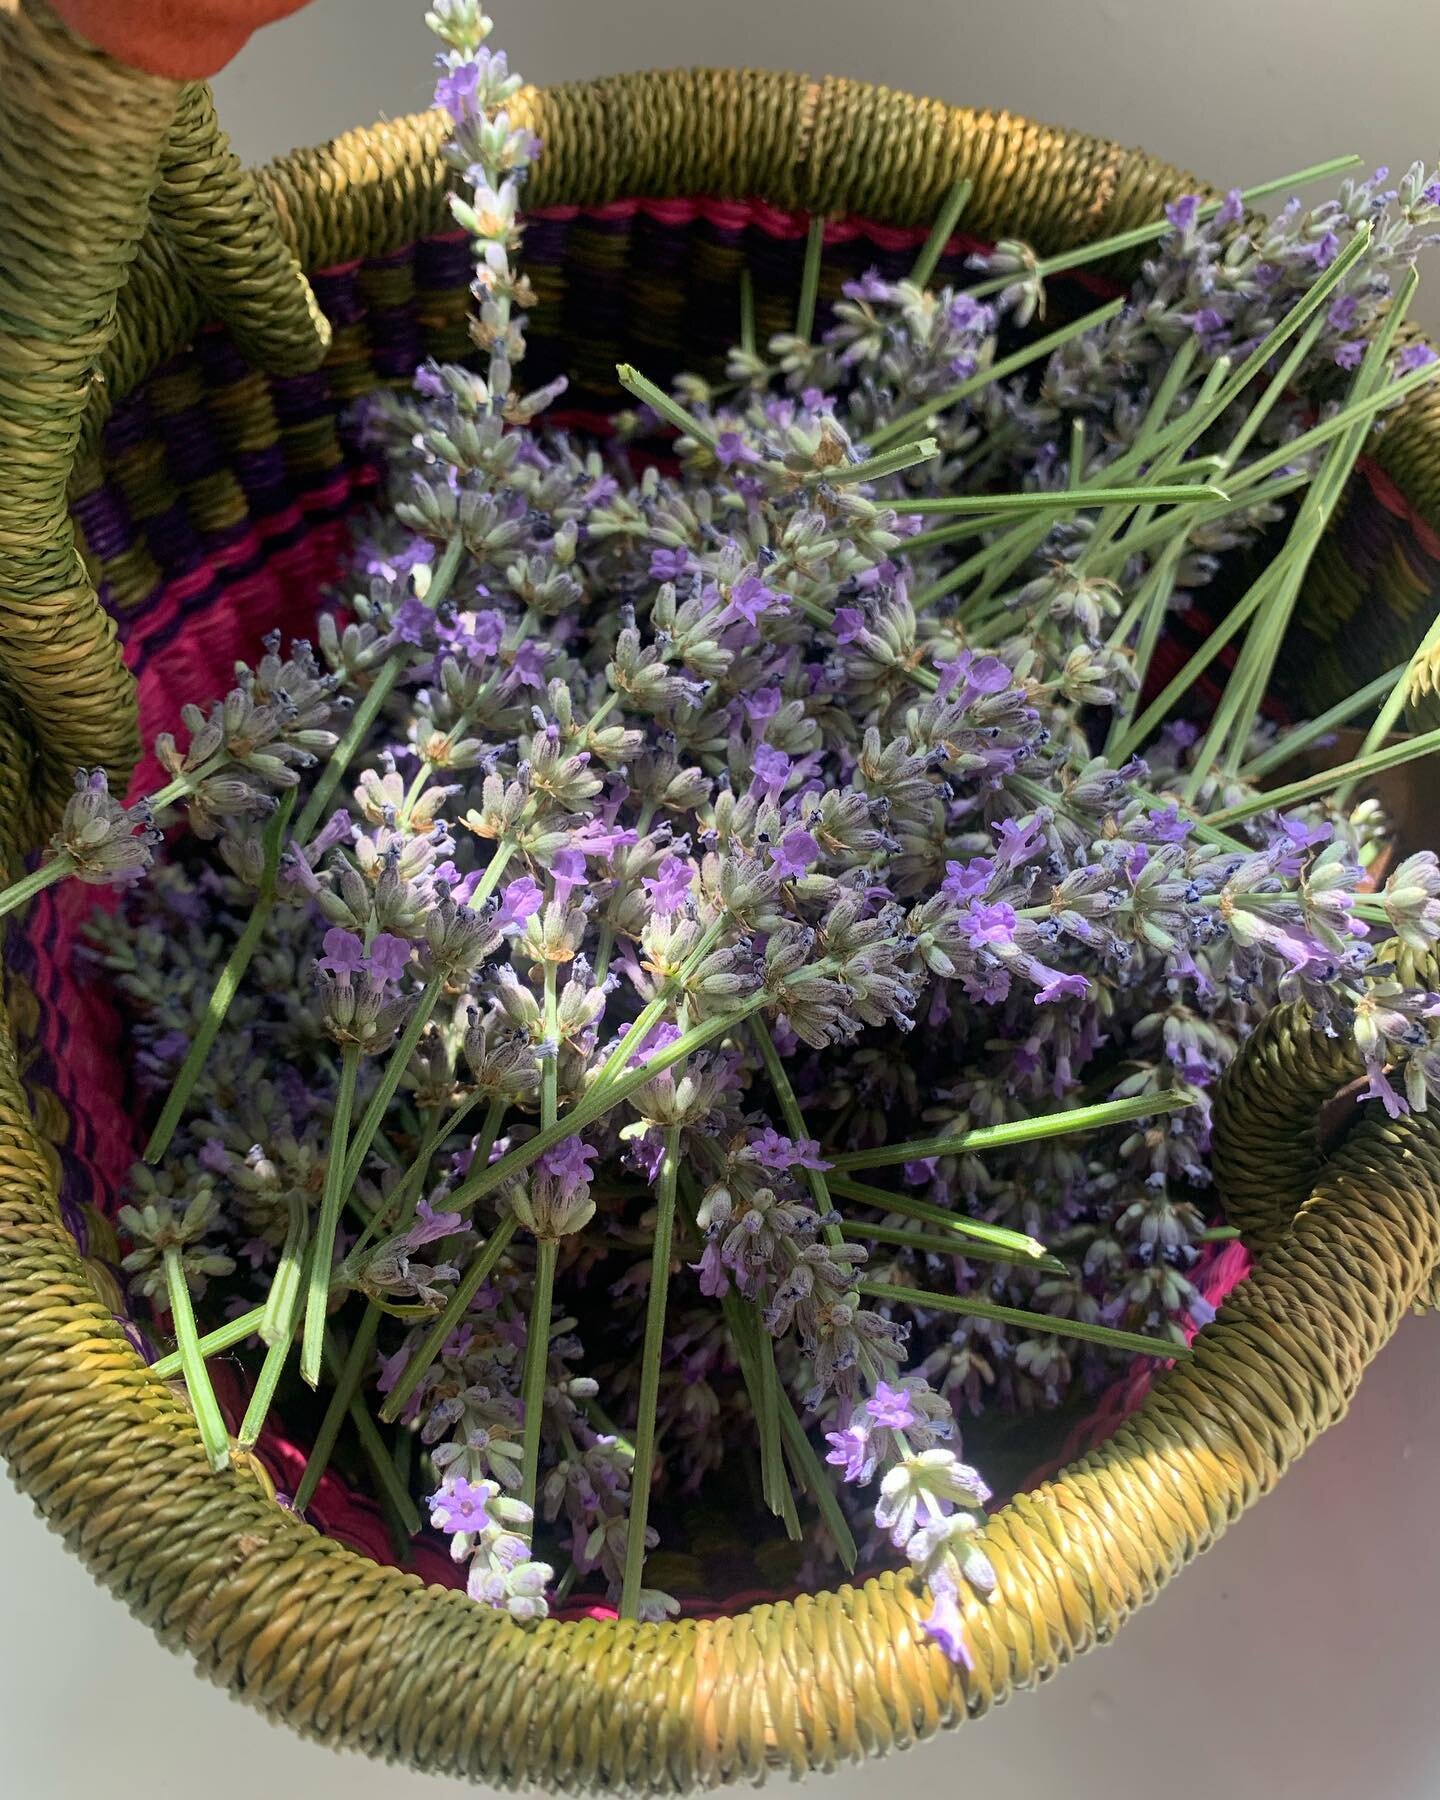 First lavender distillation was a success! 
I&rsquo;ve used this batch primarily in the treatment room and gifs for friends.  The process of working with plants and flowers to create nourishment for the skin and experiences for the senses is somethin